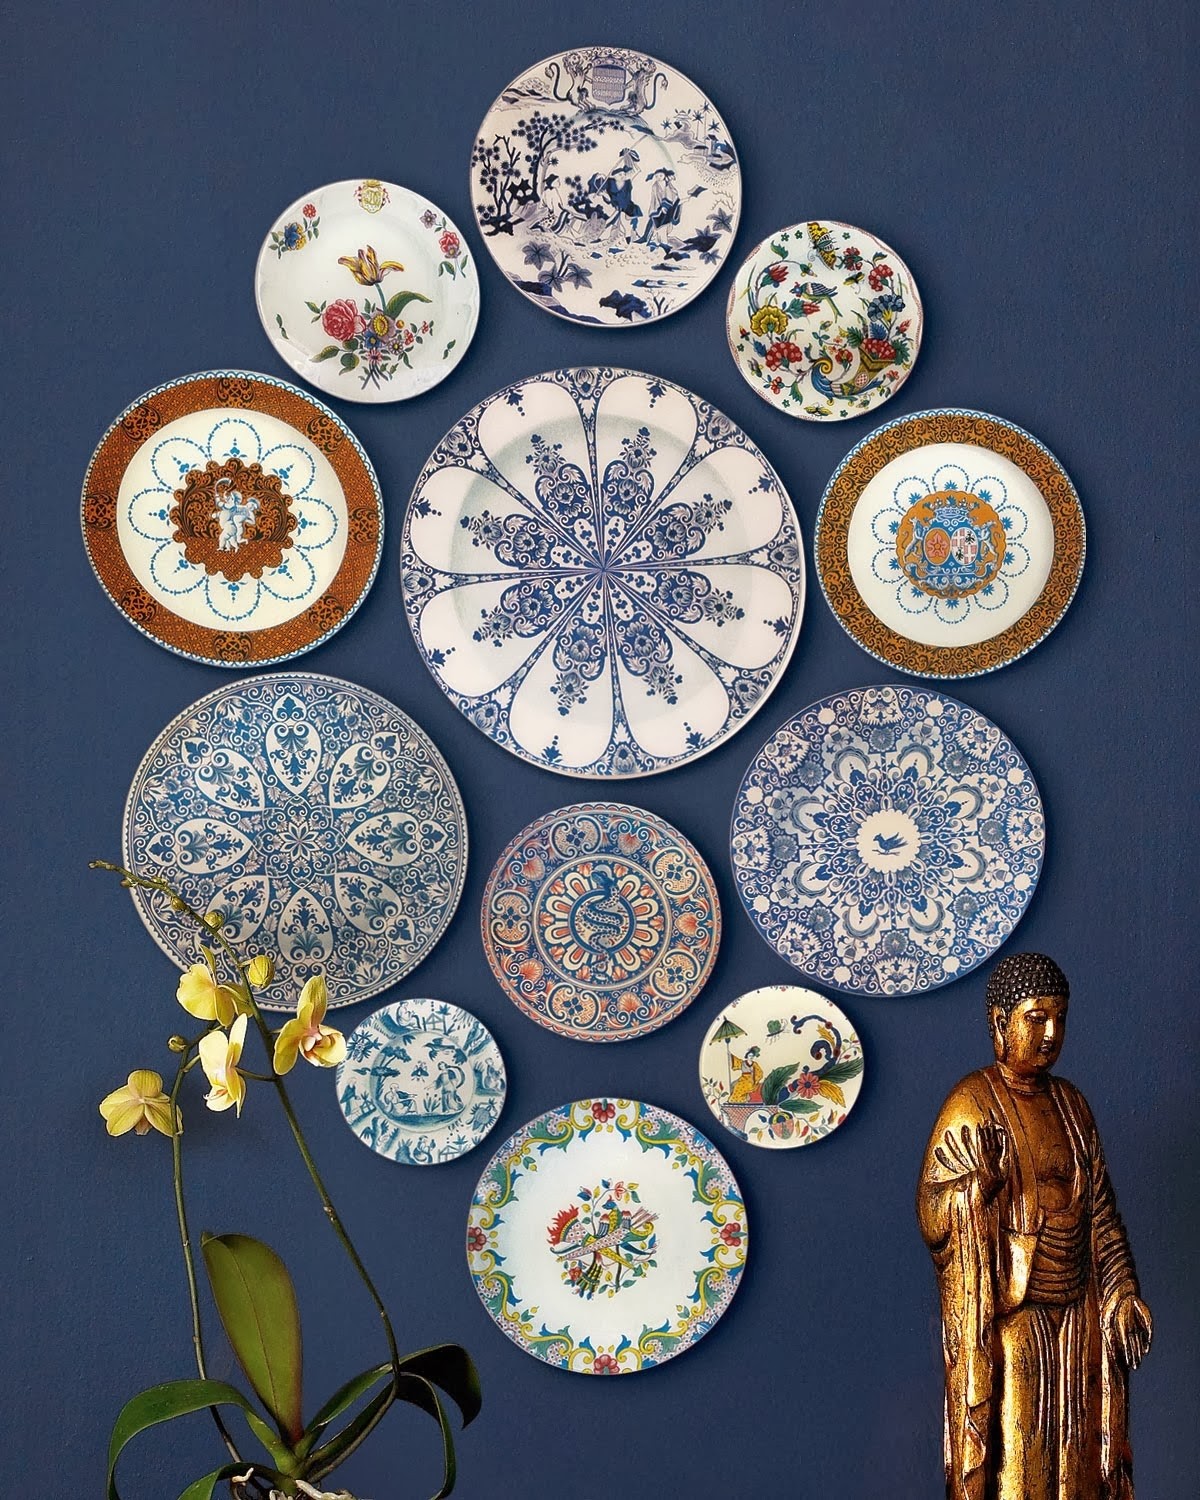 Details about   Wall Hanging Plate Home Decor Dishes Newest Style Decorative Plate Milan Design 